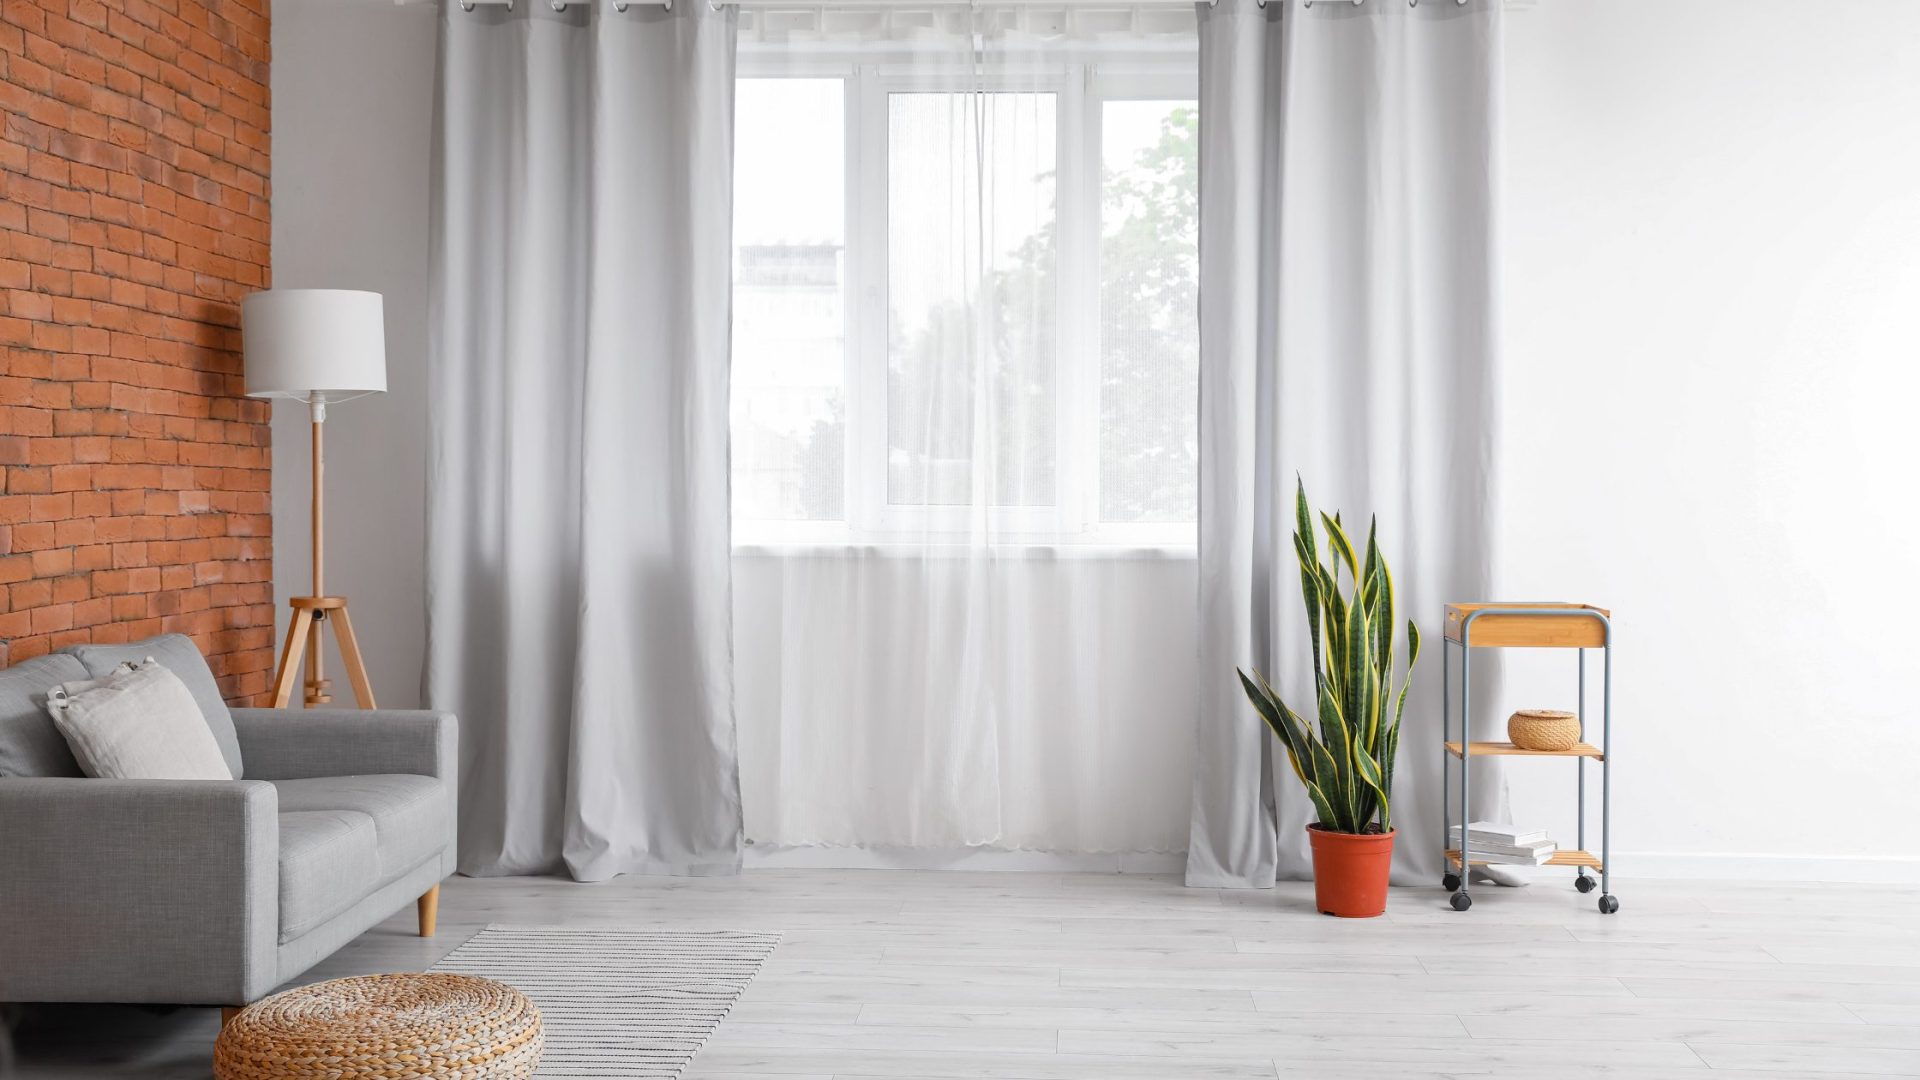 Bright & Cozy: Top Window Treatments for Light and Privacy in Your Home